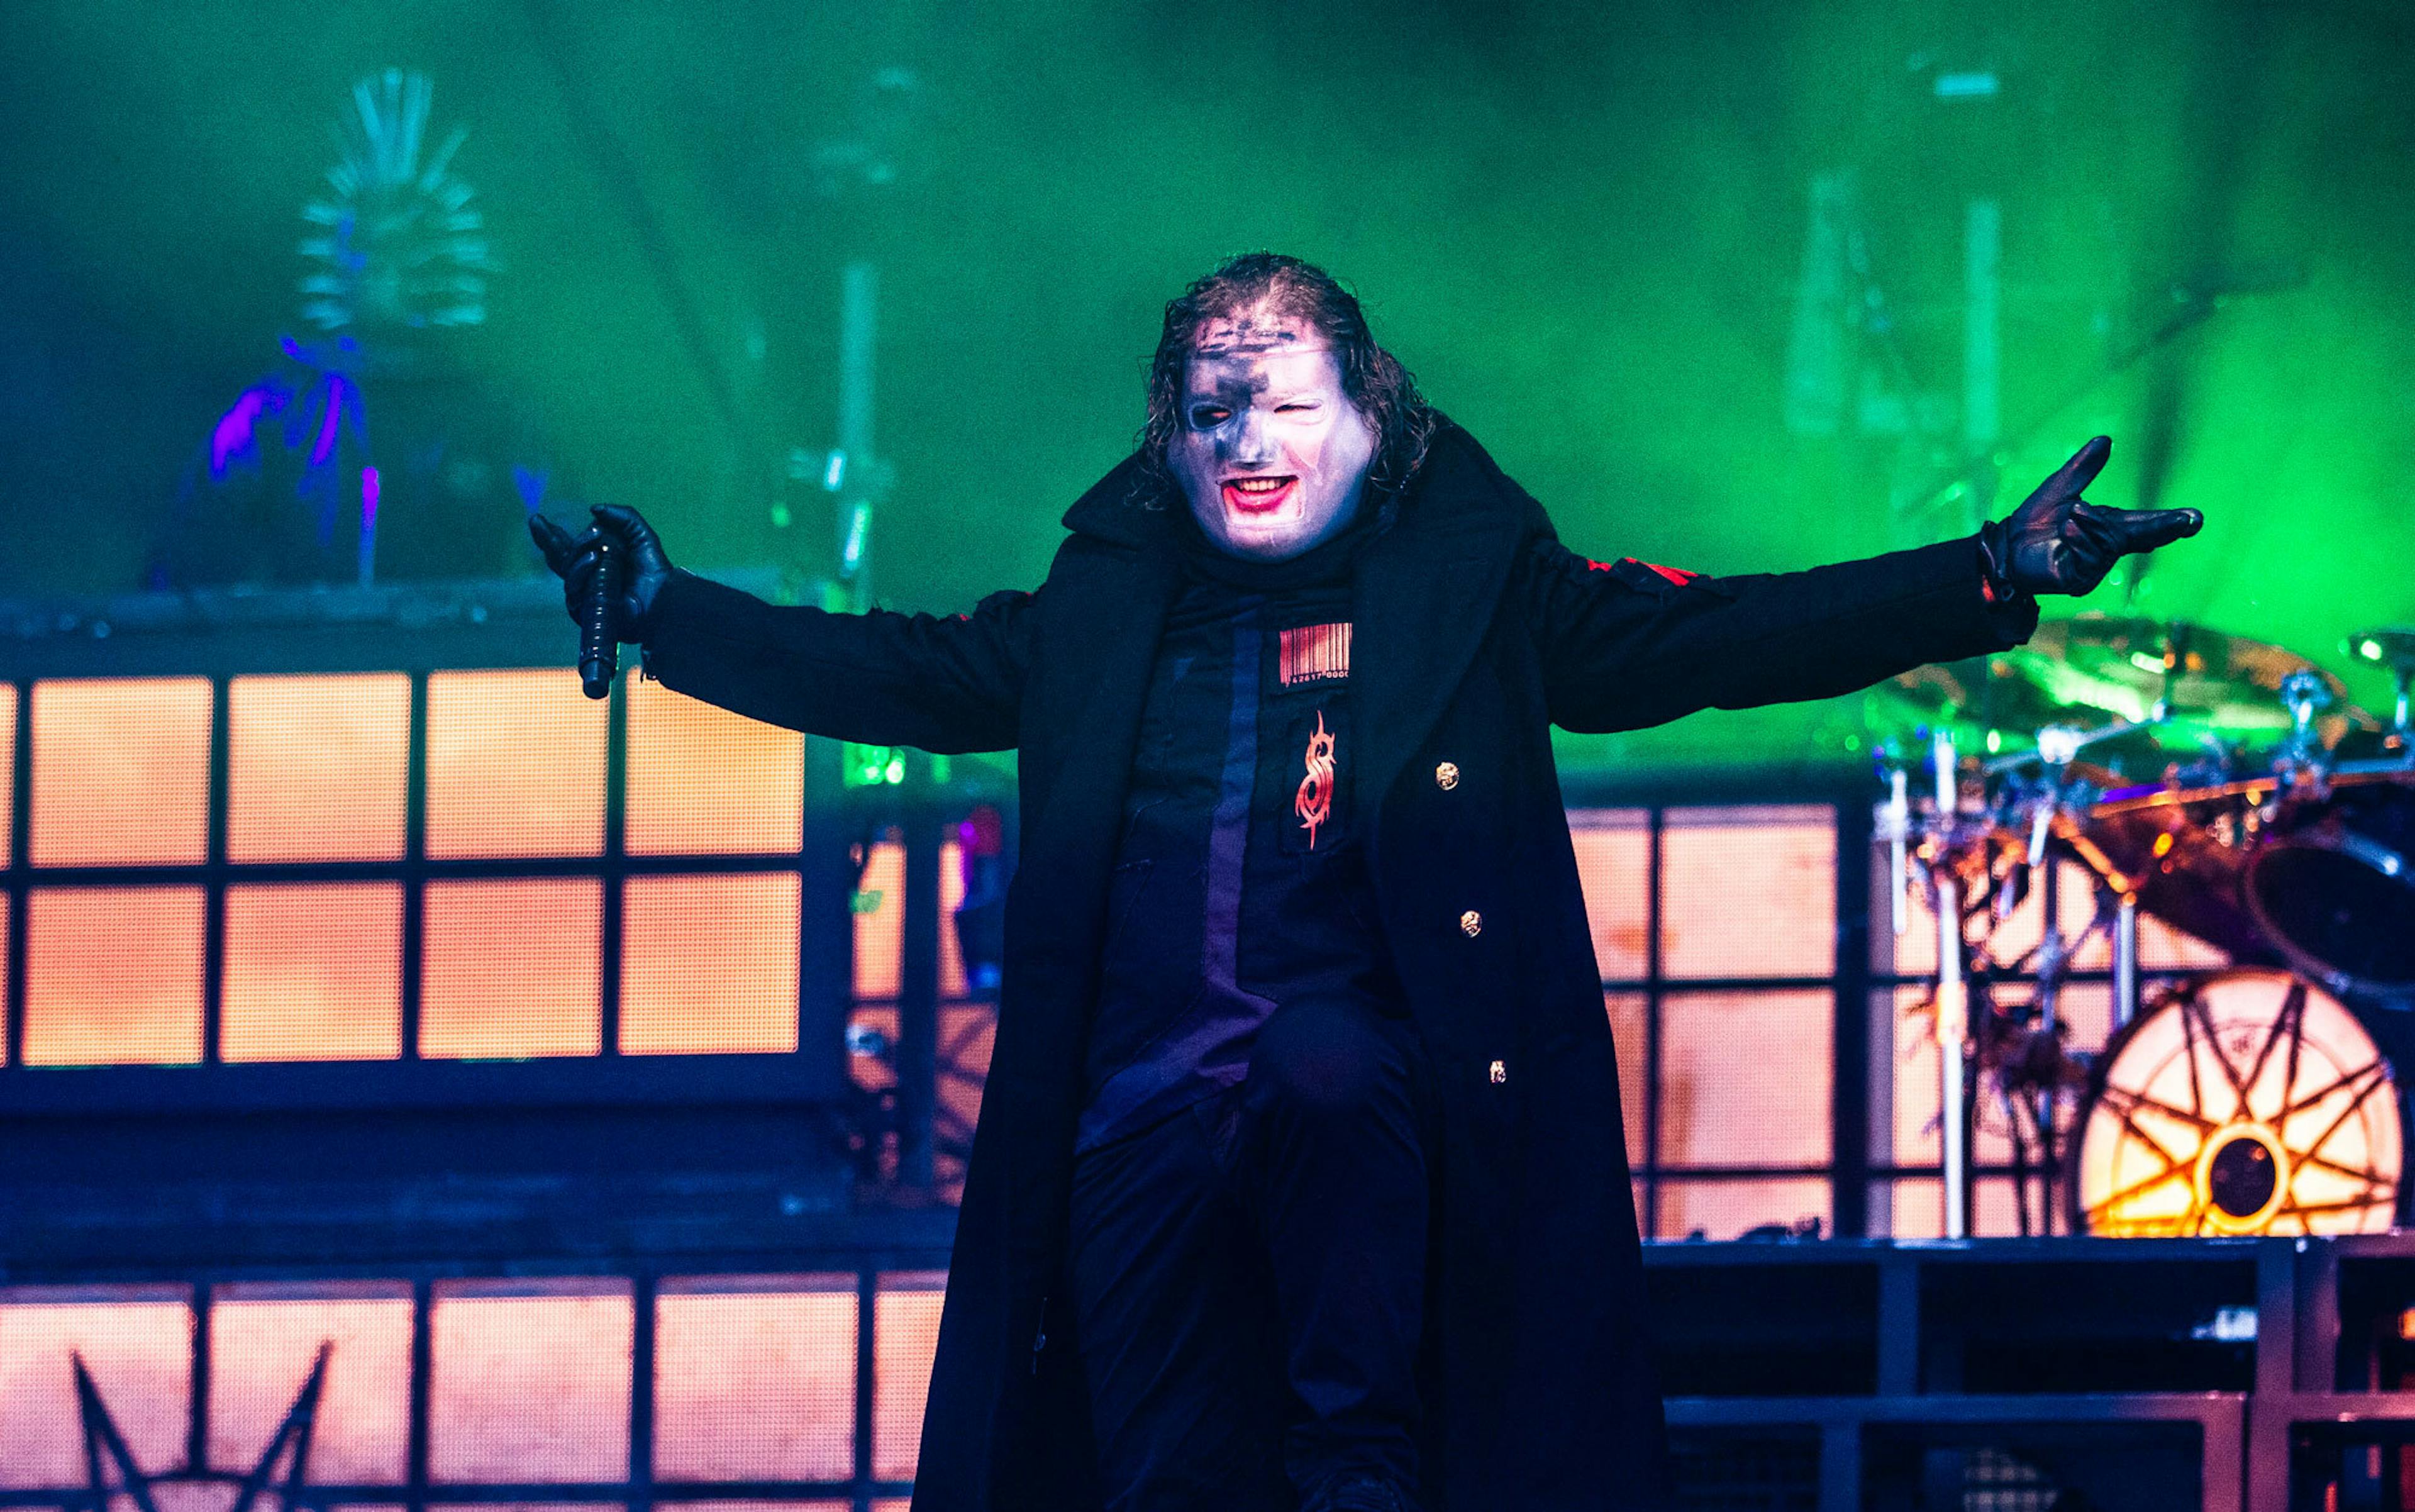 Corey Taylor On We Are Not Your Kind: "This Is Probably The Furthest We've Pushed The Boundaries Of Creativity"